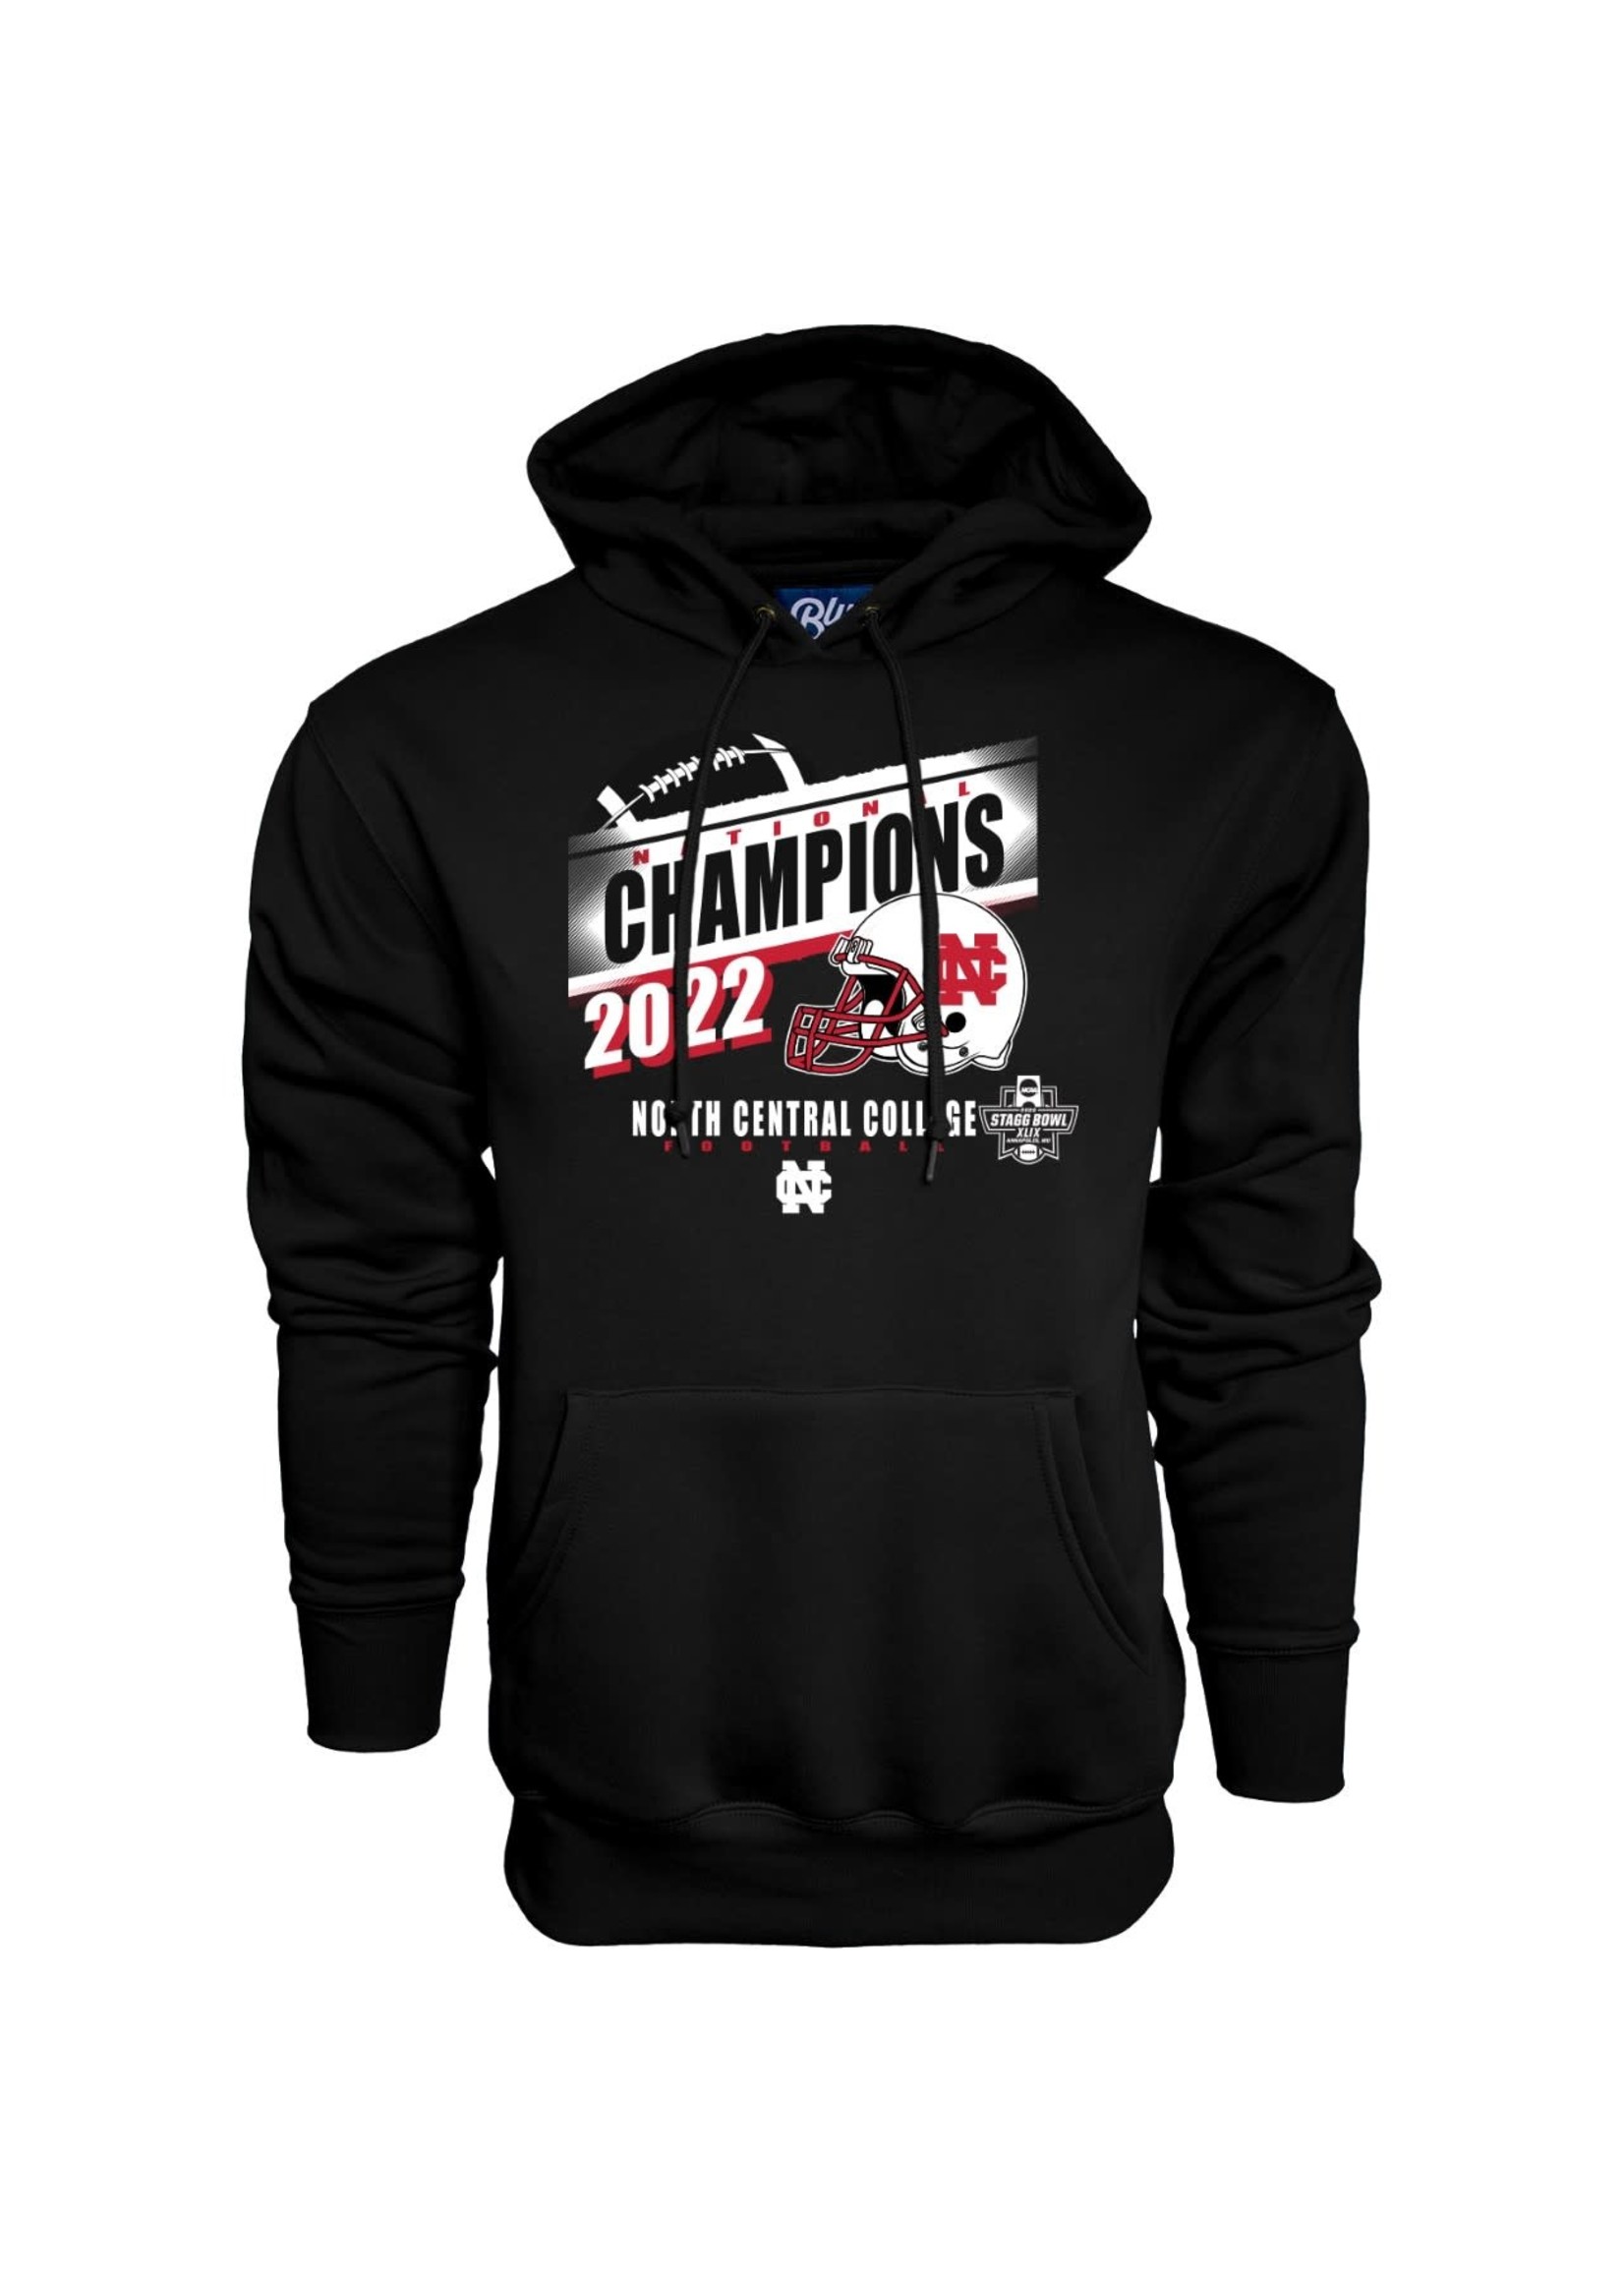 Blue 84 2022 Championship Hoody by Blue 84